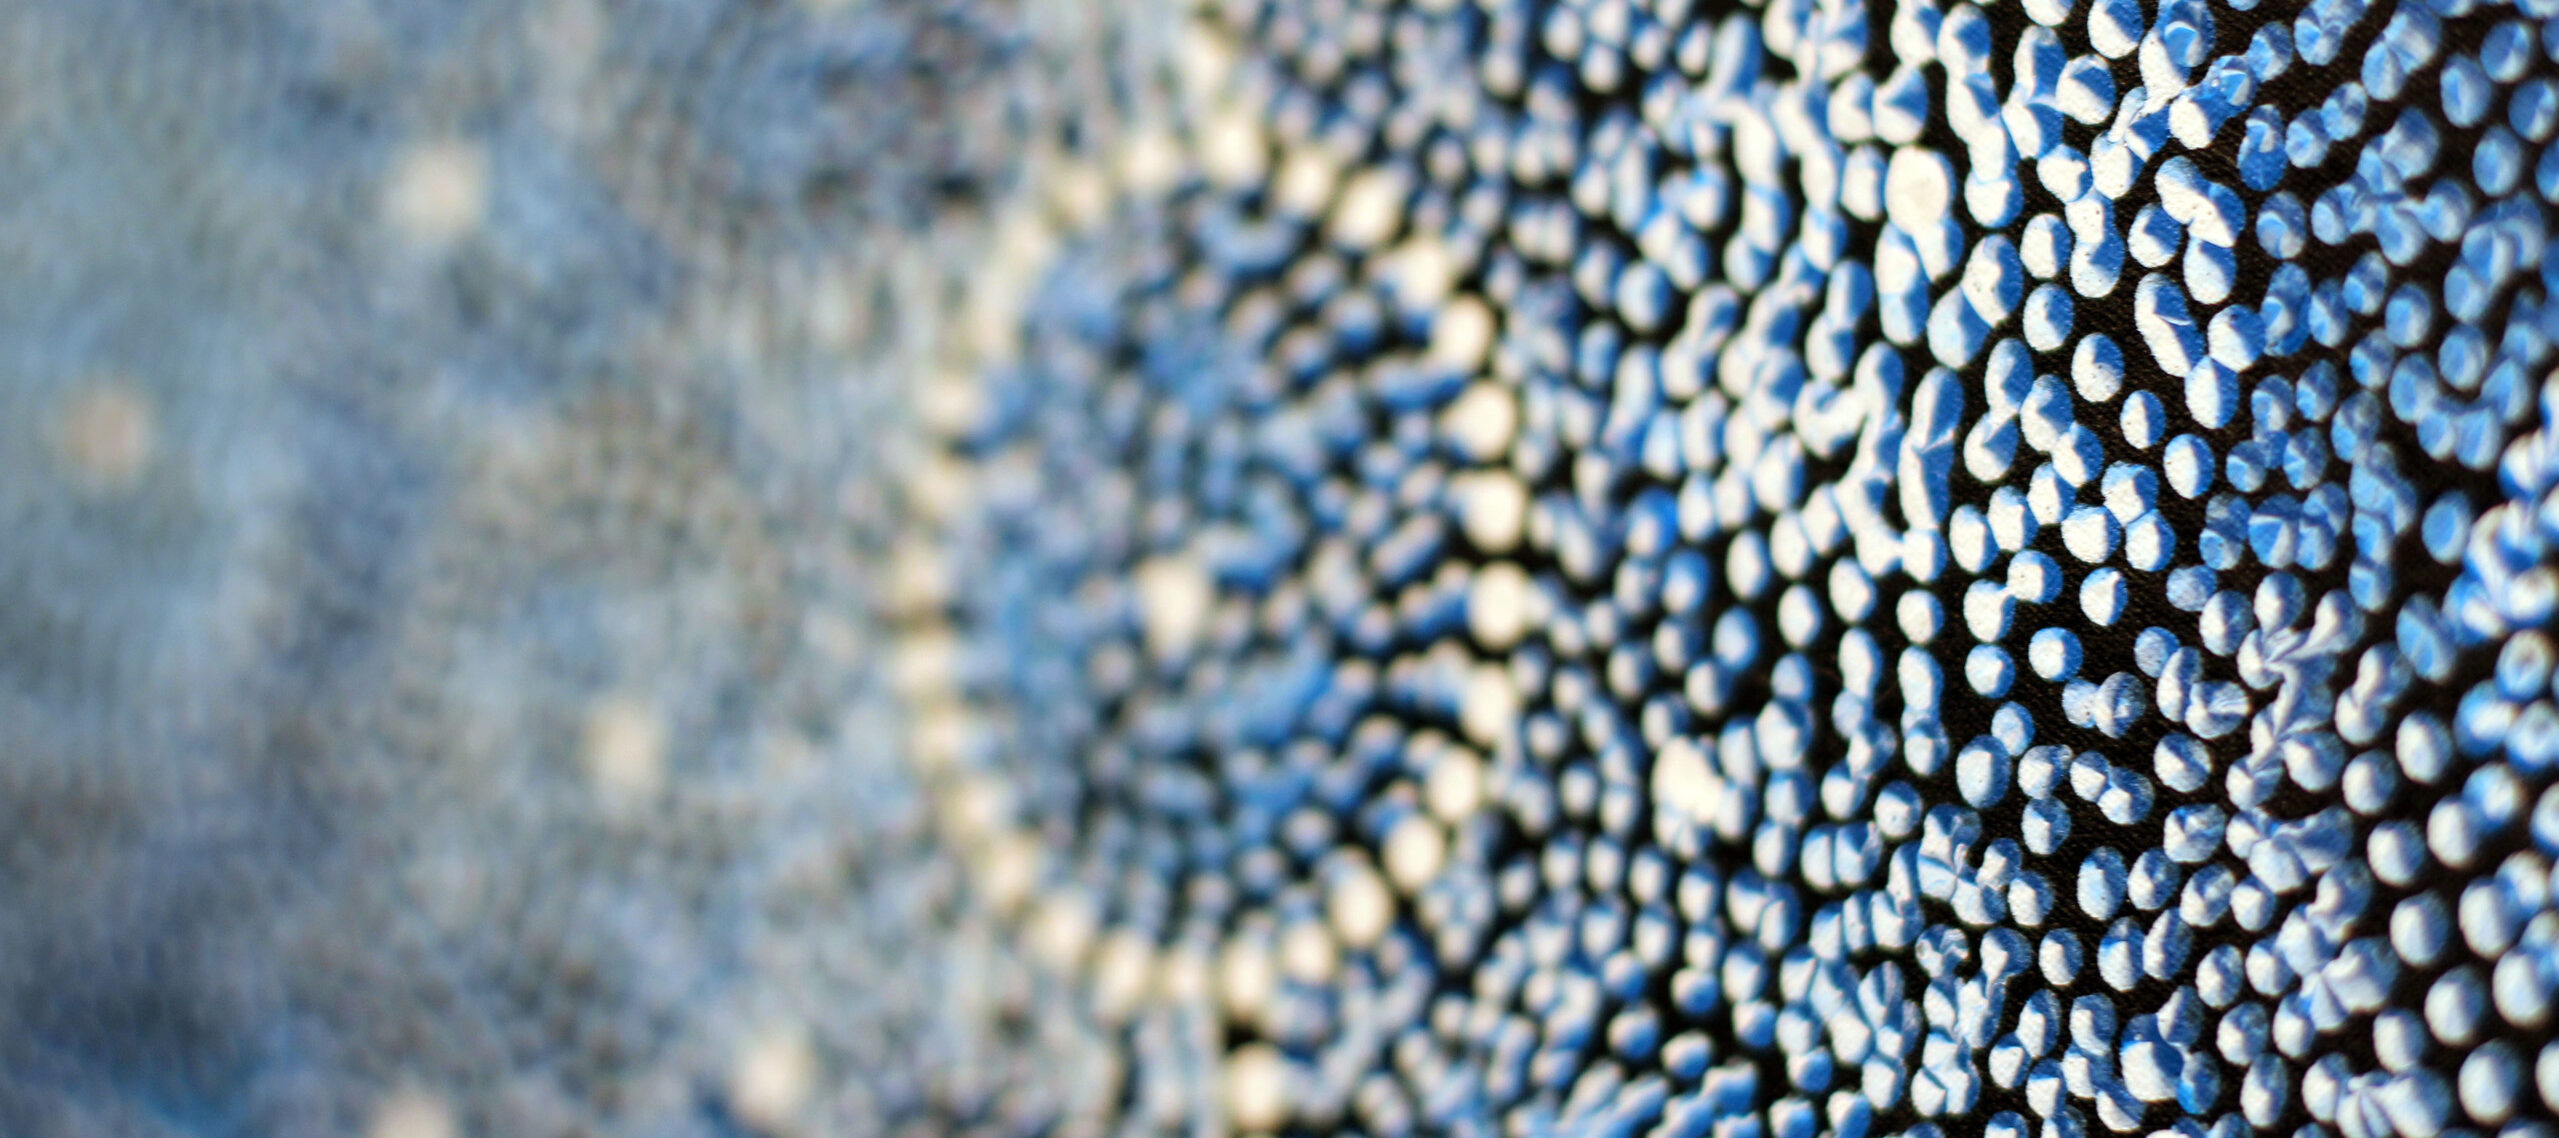 A very close-up detail shot of a painting featuring tiny dots arranged to form vary shades of blue circles outlined in white. Layered blue dots, appearing almost three-dimensional against a black background, are in focus in the foreground and the blue background is blurred.